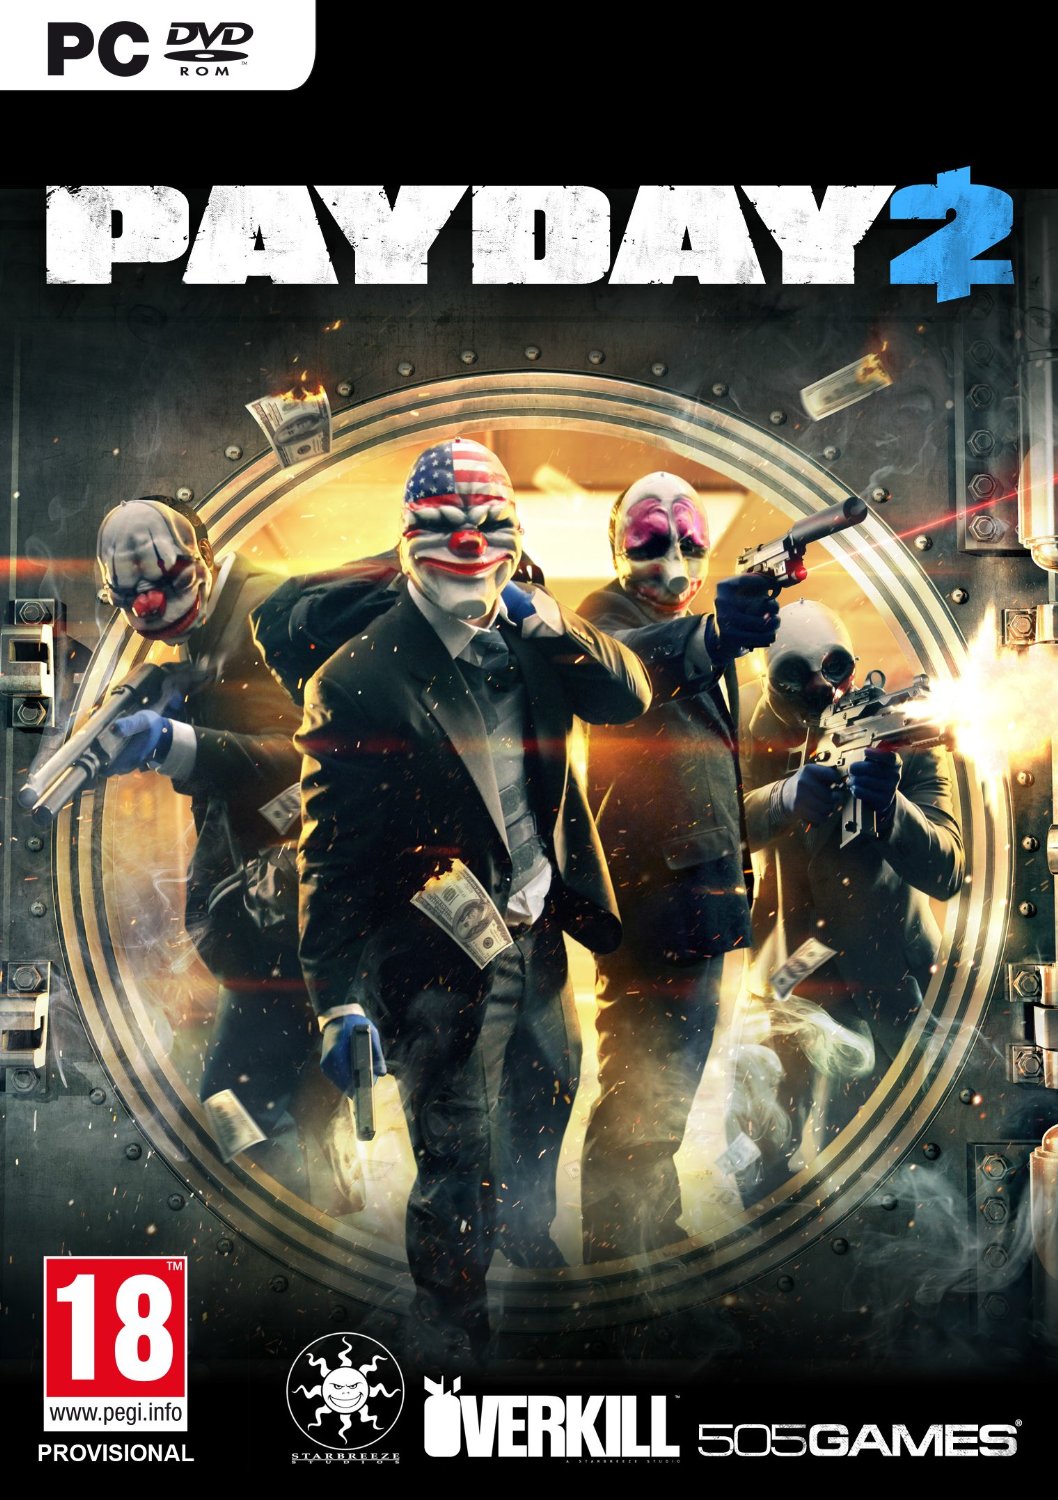 Payday 2 - Career Criminal Edition (2013/PC/Eng)